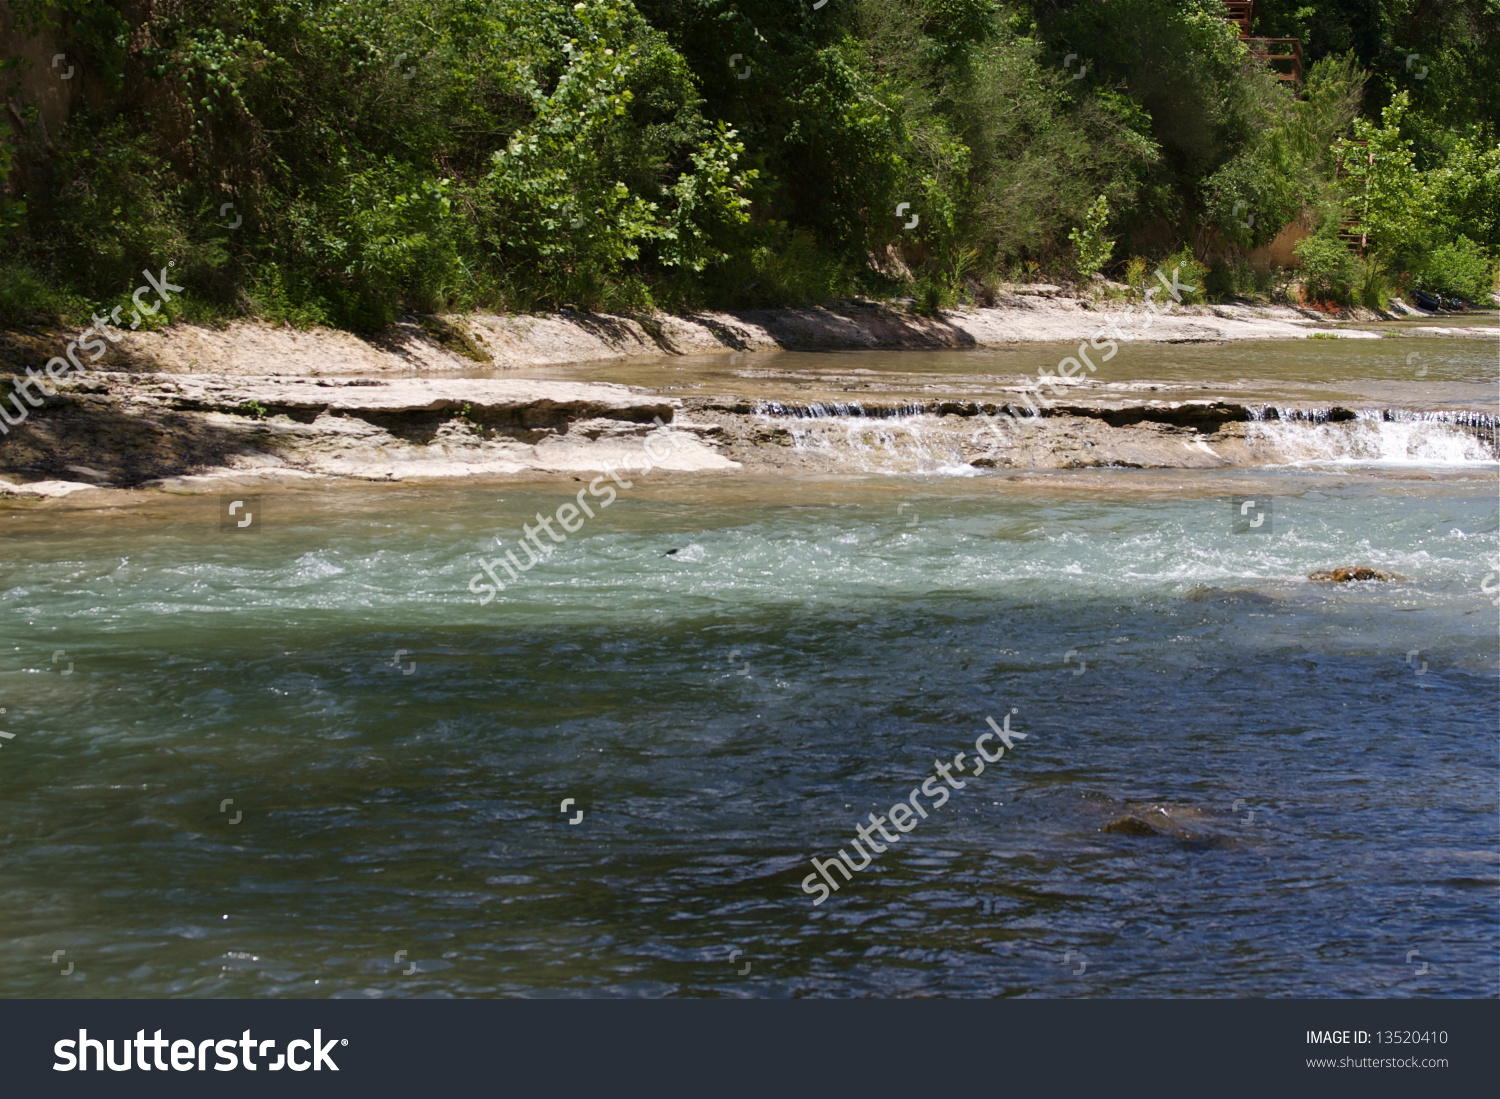 Guadalupe River clipart #8, Download drawings